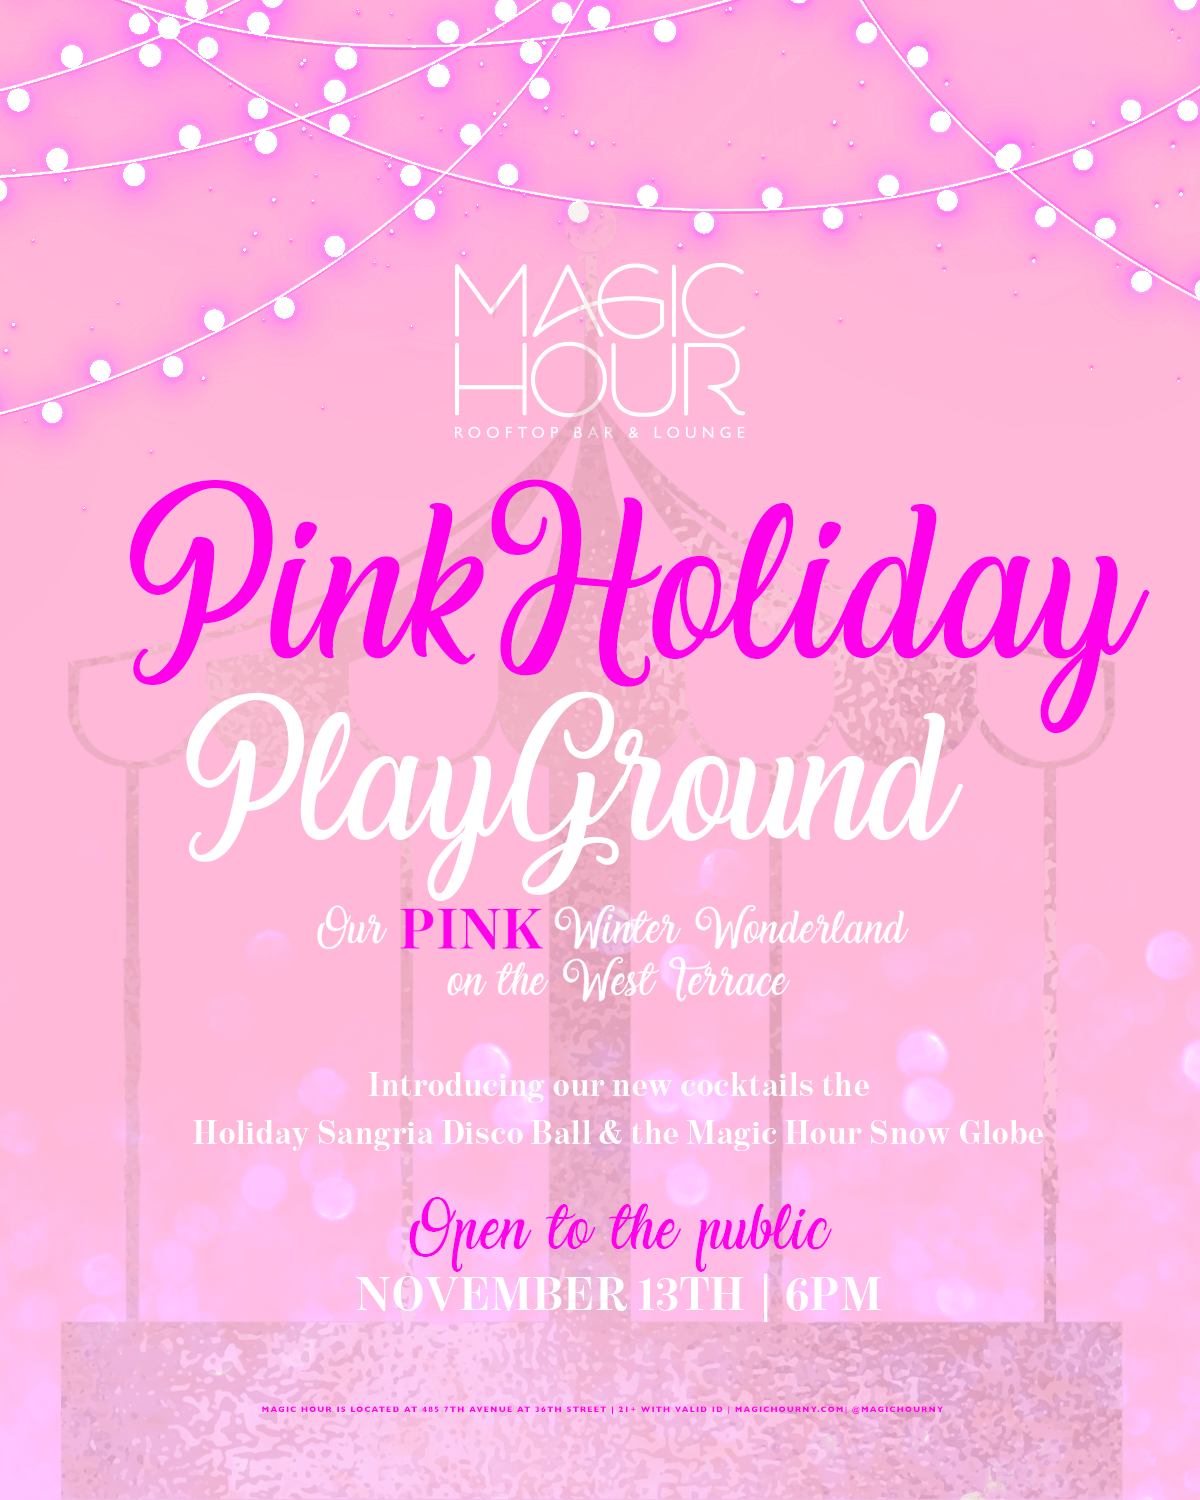 Pink Holiday Playground Launch Party